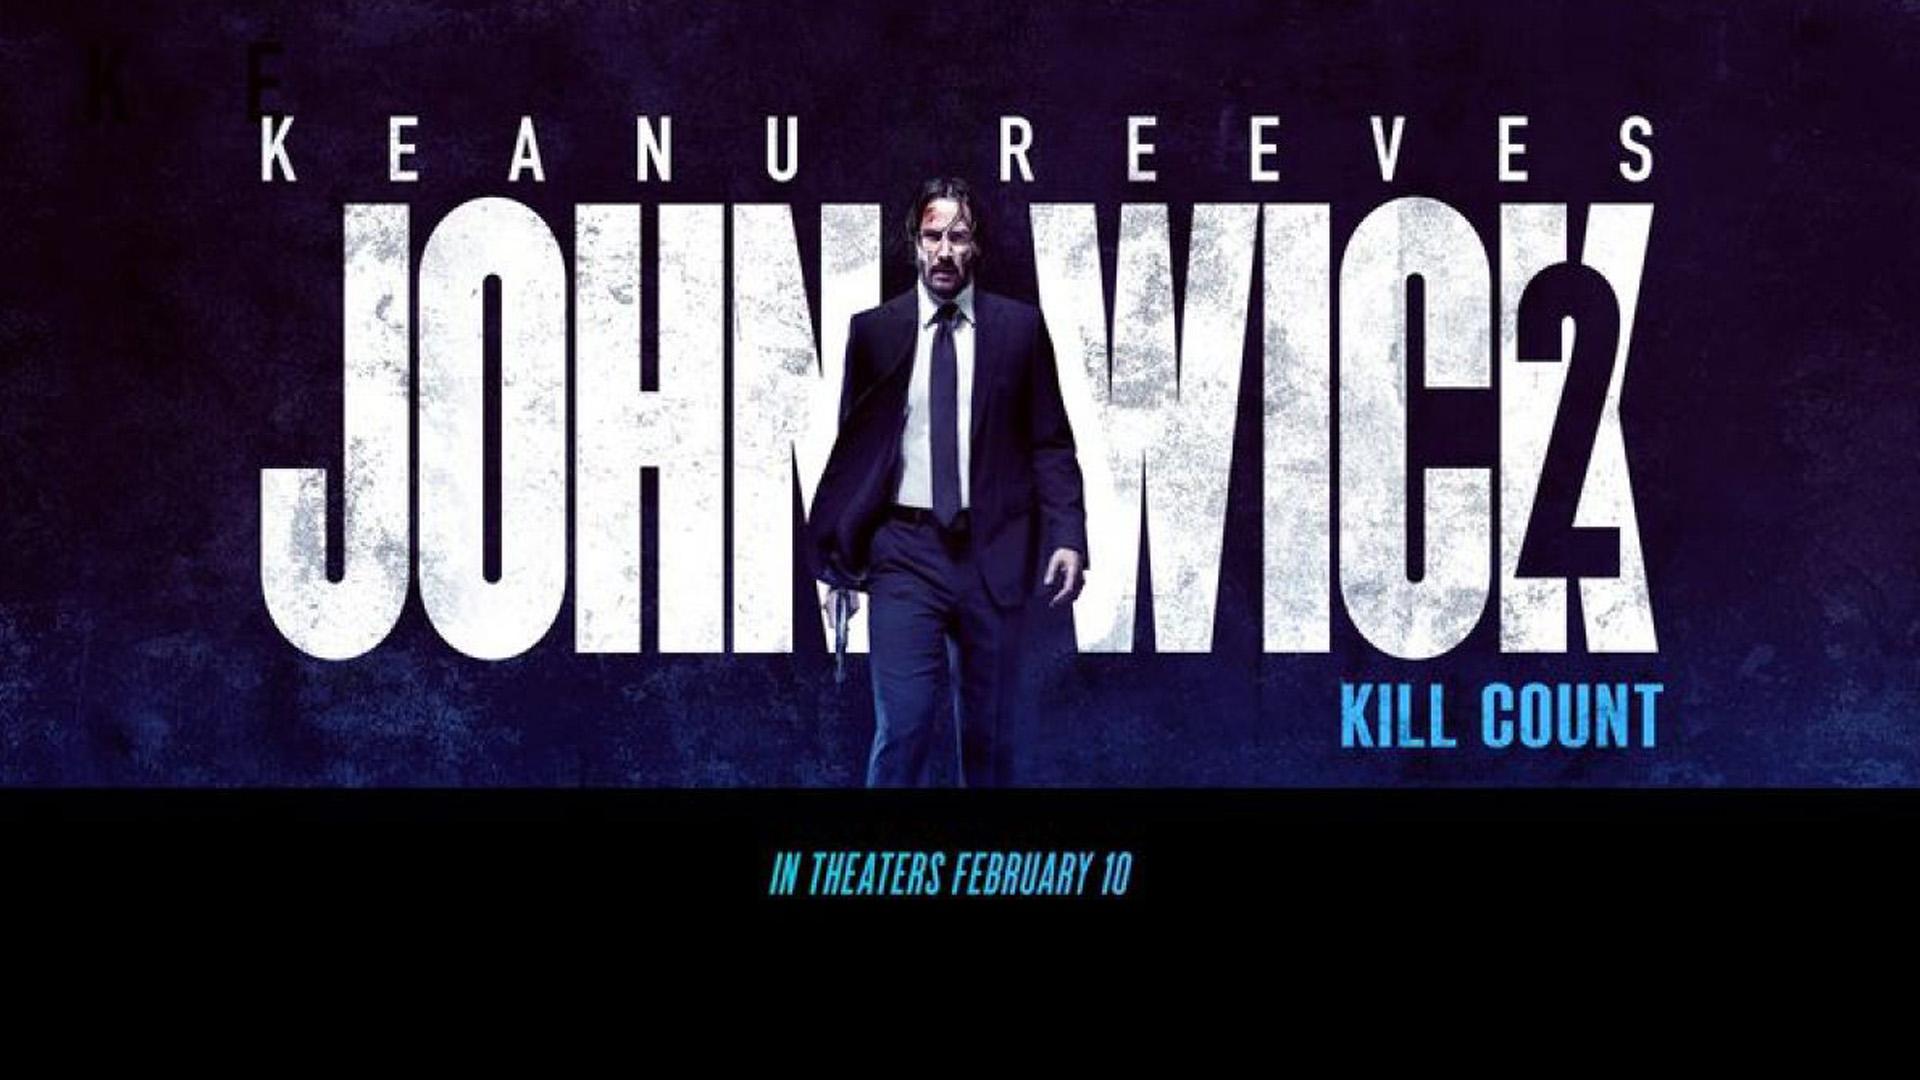 Learn the Final JOHN WICK: CHAPTER 2 Body Count in This